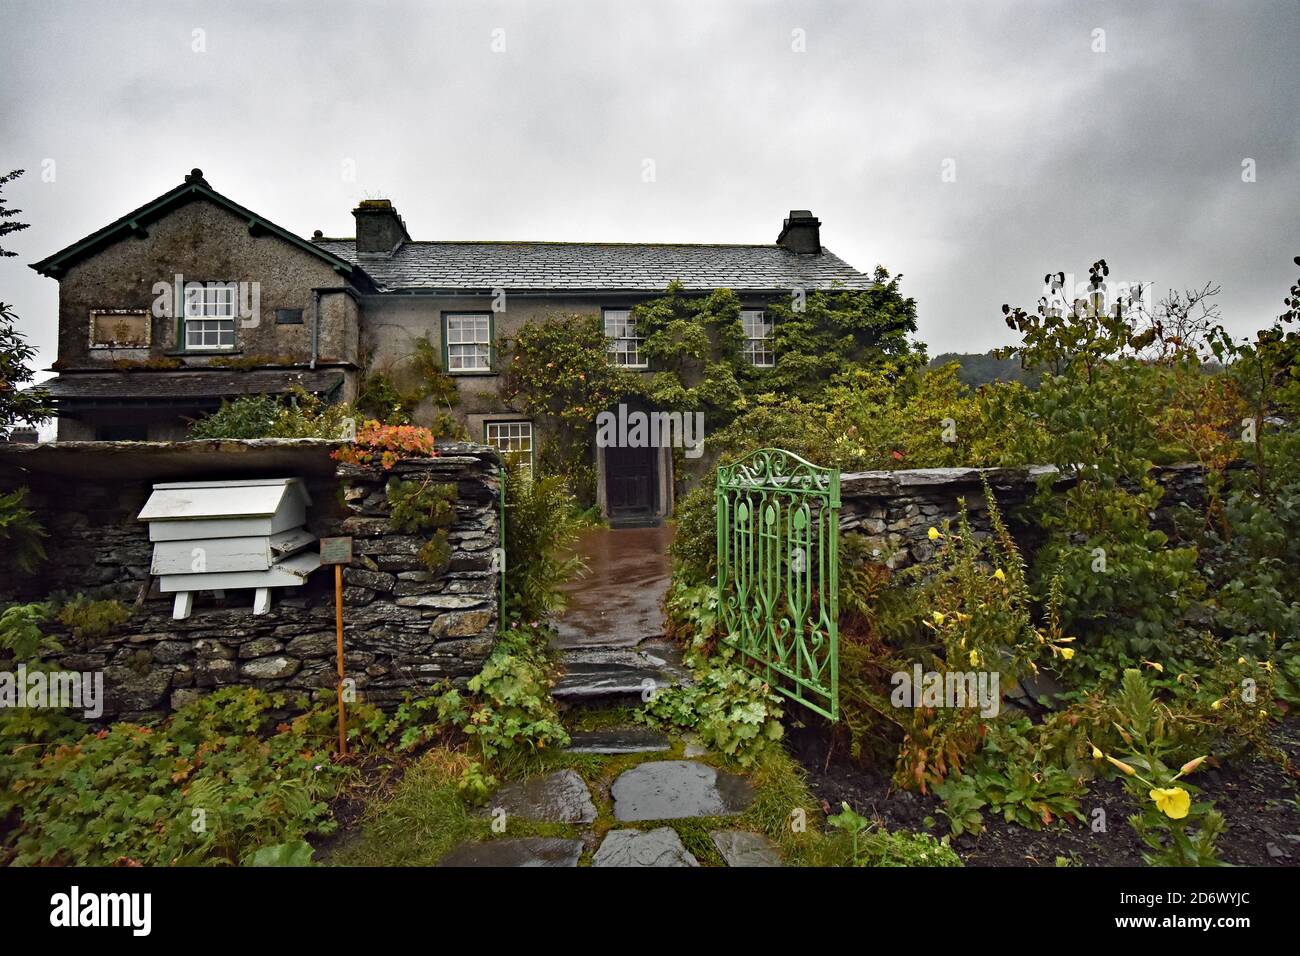 Hill Top, the home of children's author, Beatrix Potter, in the Lake District, England. Seen from the historically recreated garden with green gate. Stock Photo